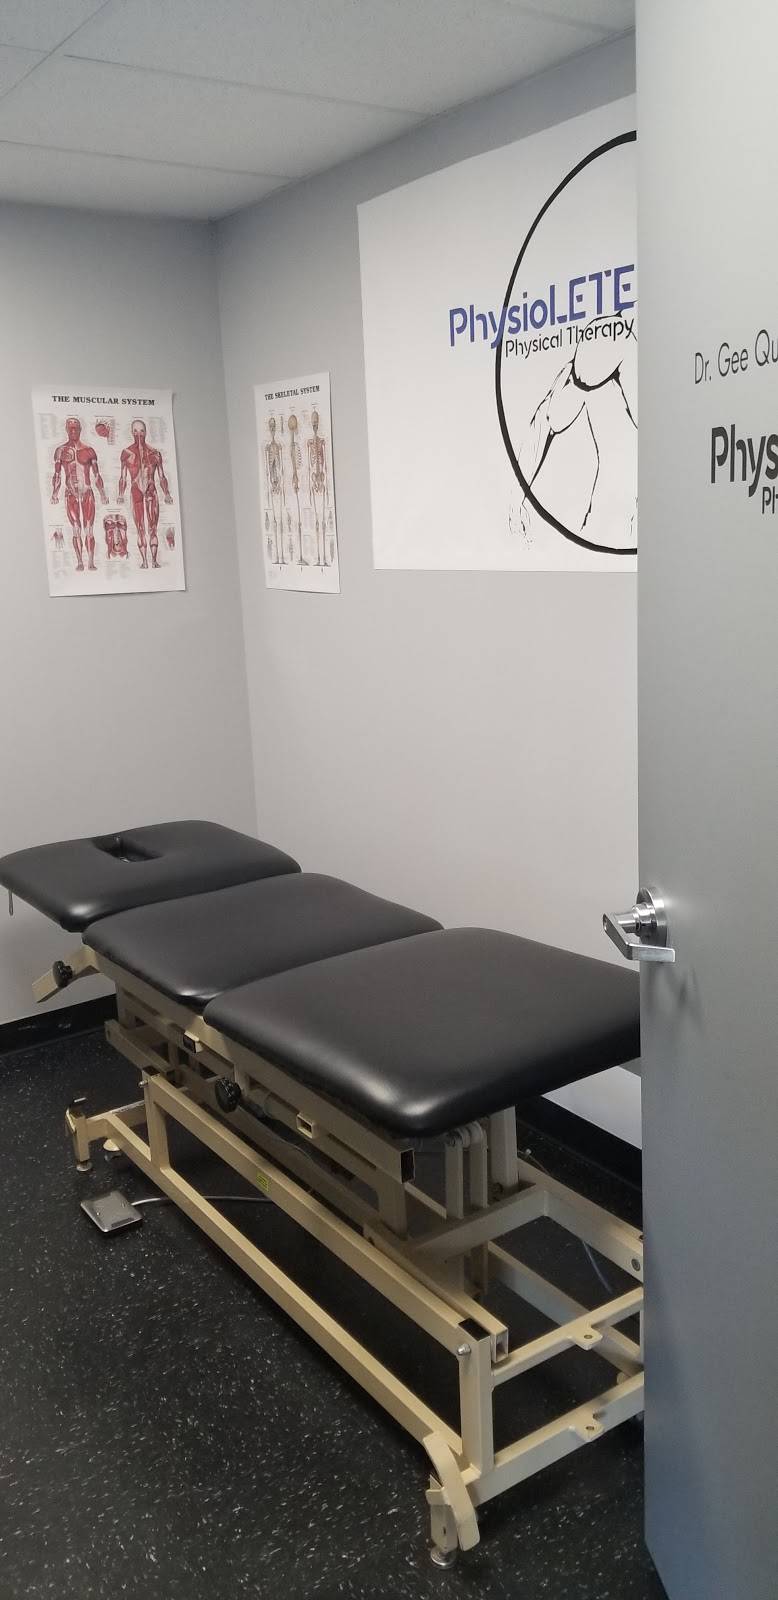 PhysioLETE Physical Therapy | 5139 W 140th St, Brook Park, OH 44142 | Phone: (216) 624-3771